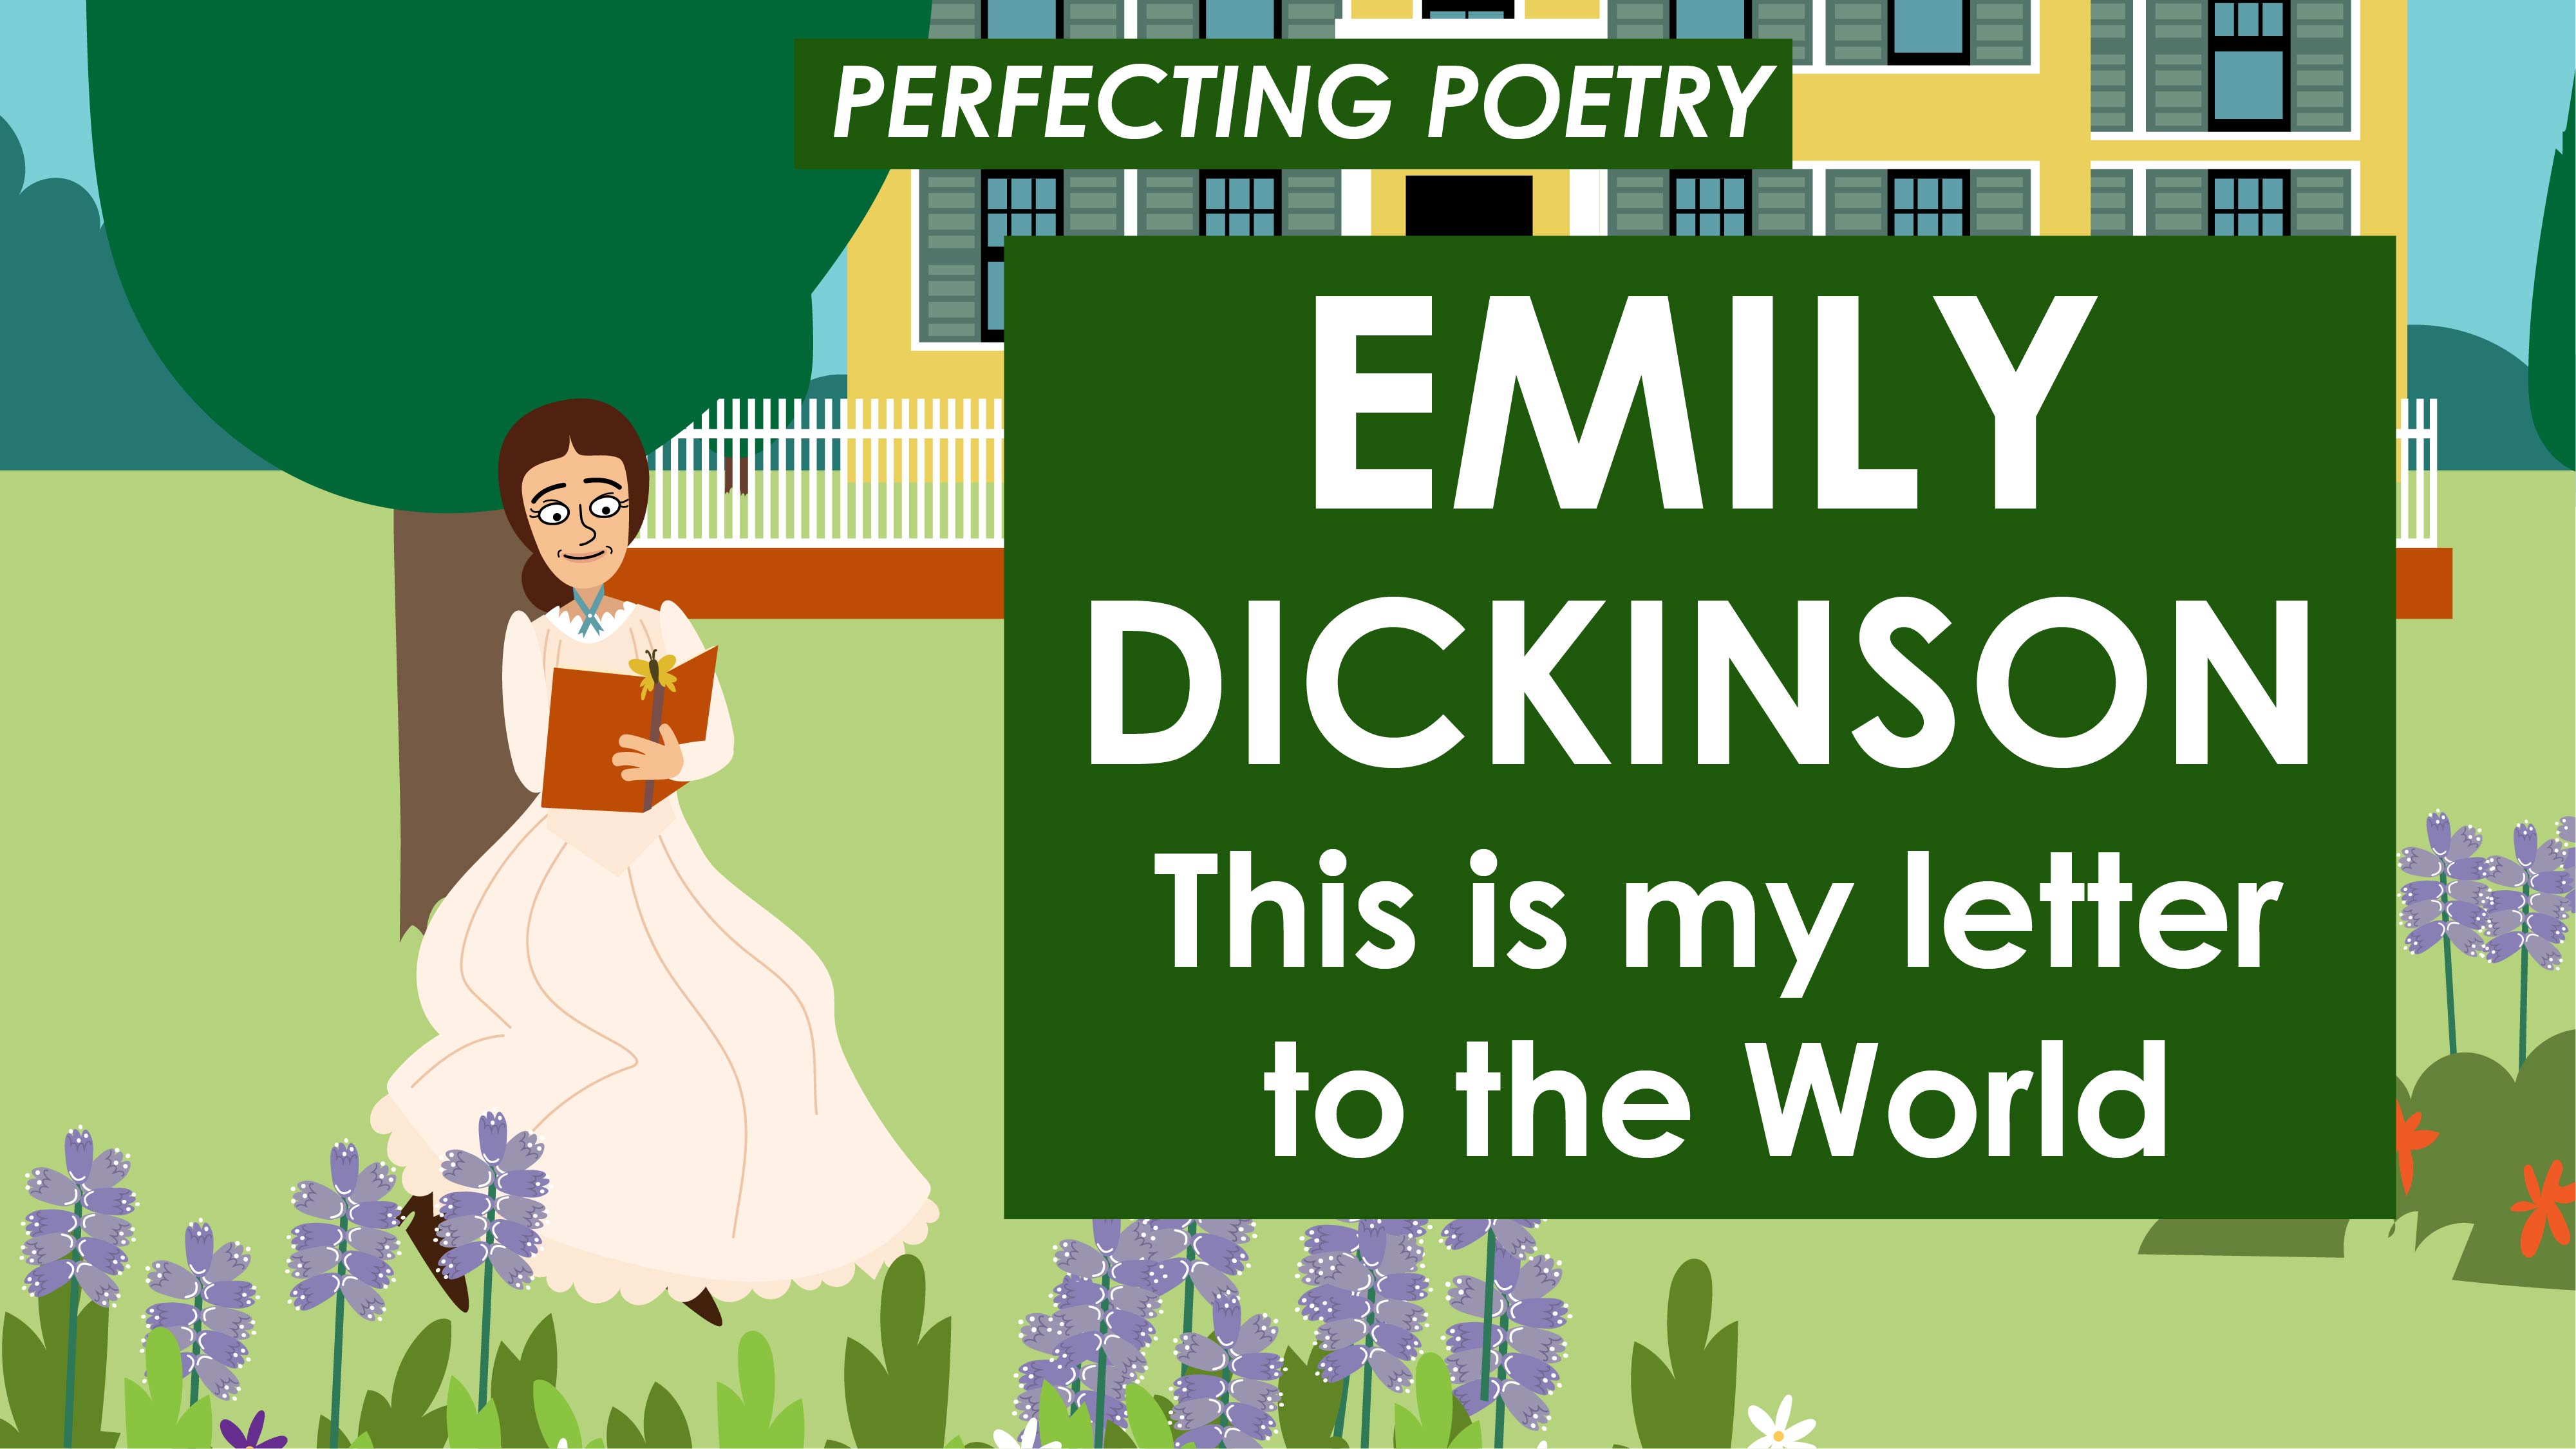 This is my letter to the World - Emily Dickinson - Perfecting Poetry